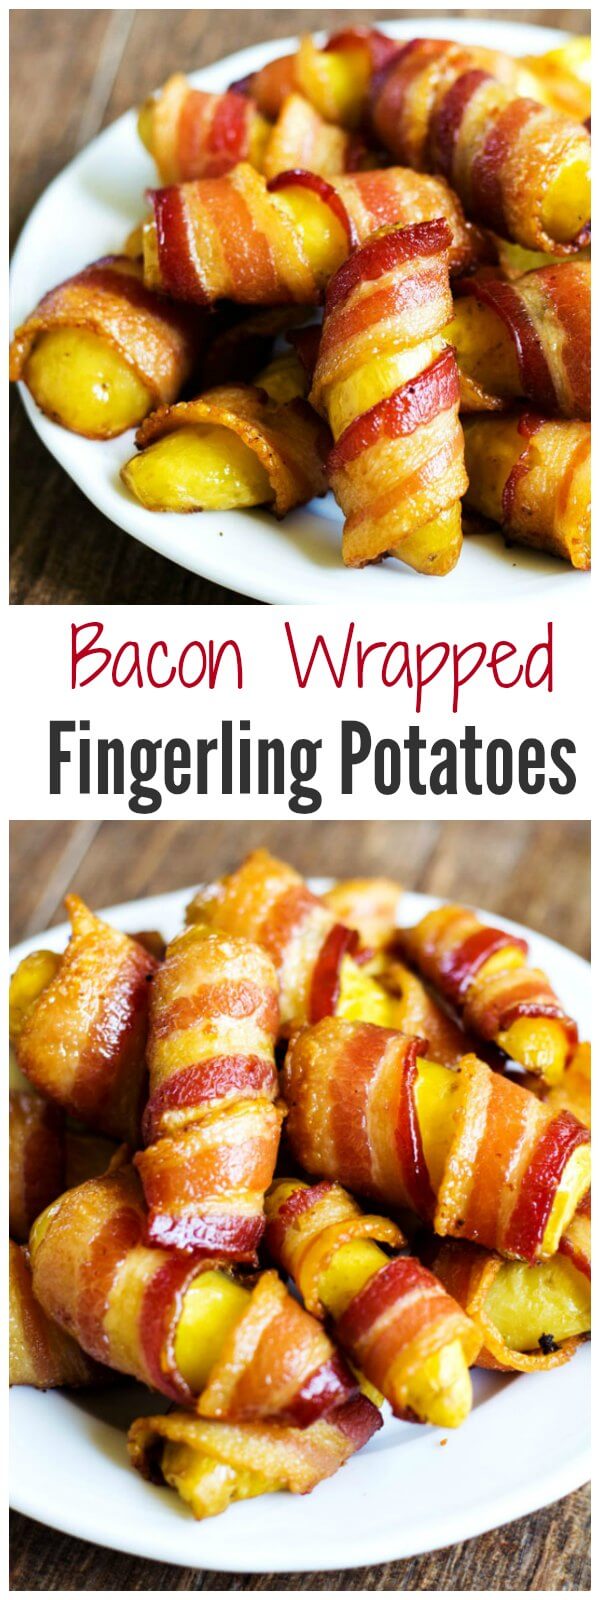 Bacon and fingerling potatoes are all you need for these finger-licking appetizers. Savory little bites full of flavor!